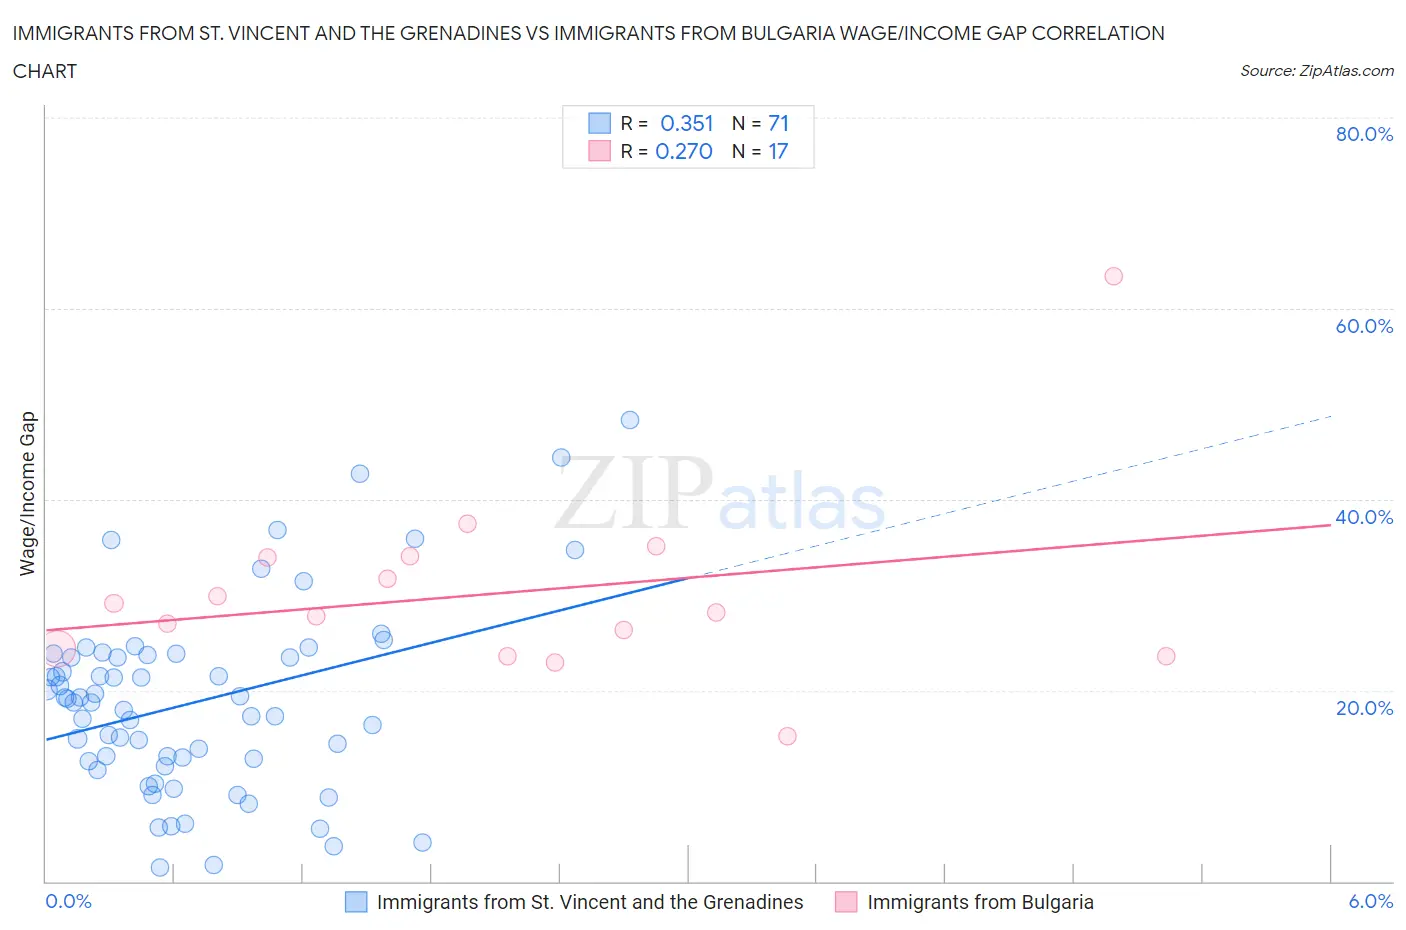 Immigrants from St. Vincent and the Grenadines vs Immigrants from Bulgaria Wage/Income Gap